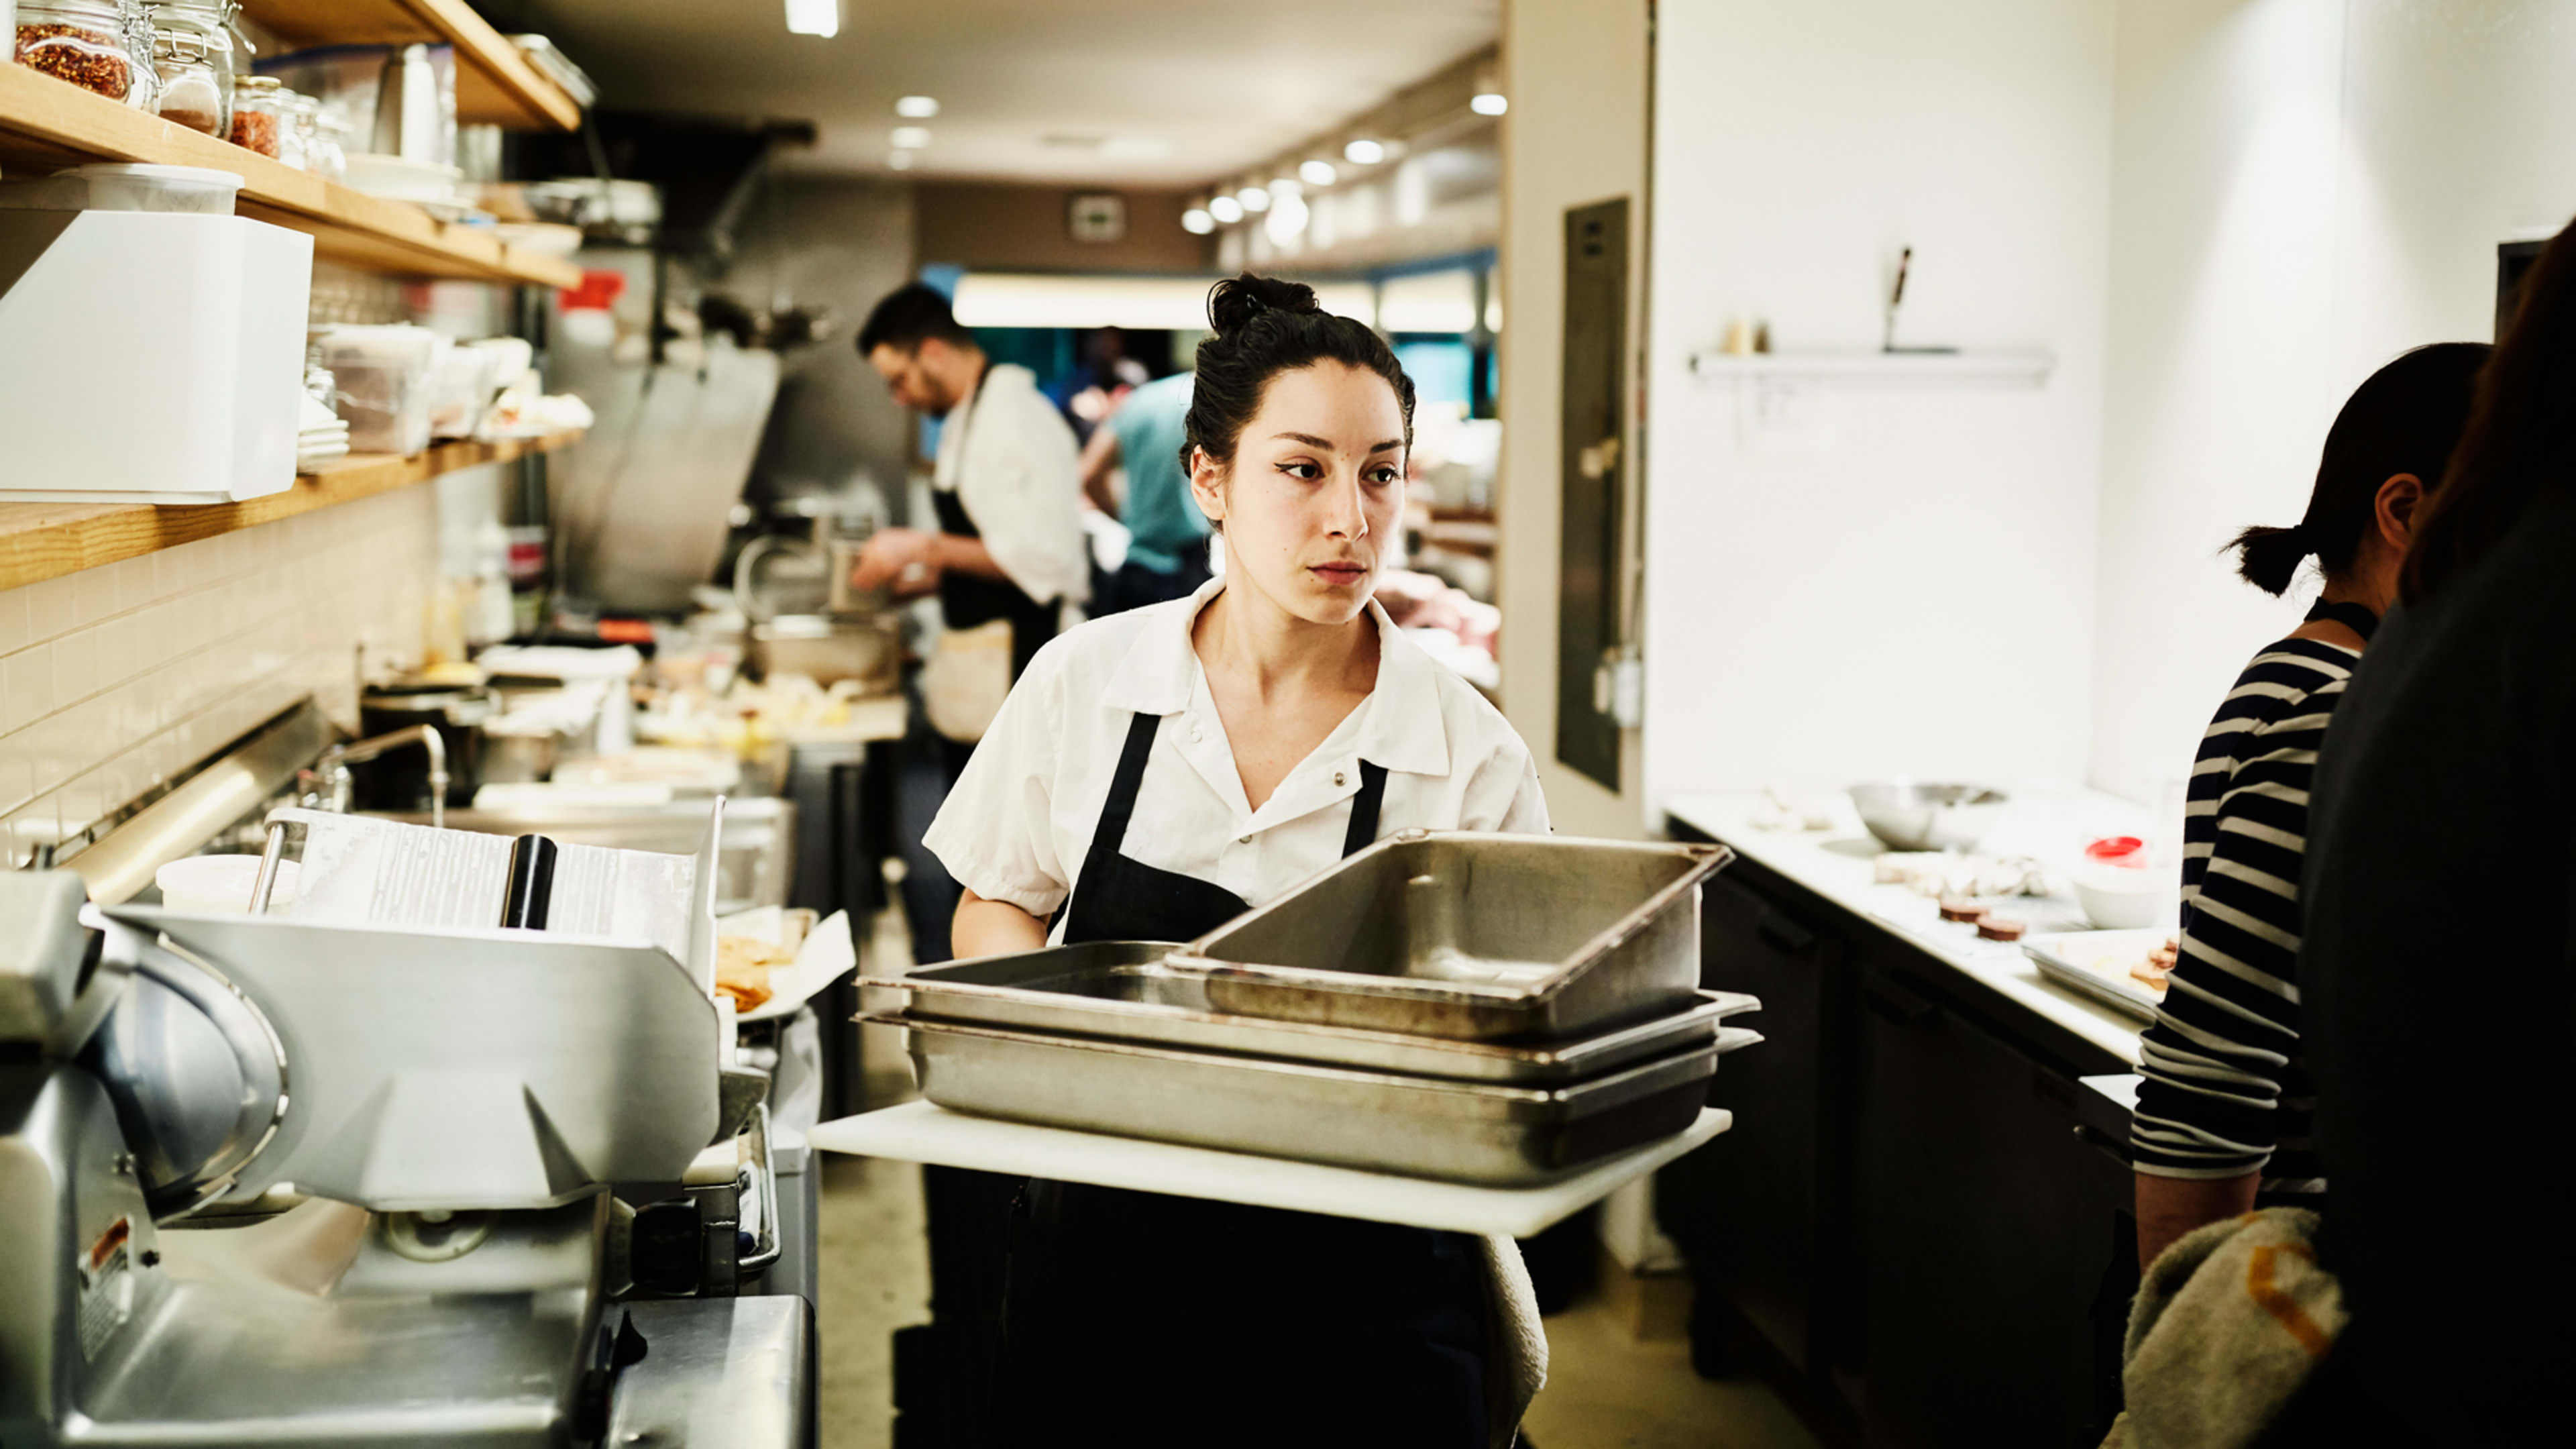 The restaurant industry has a shortage of women leaders. But the pandemic might change that